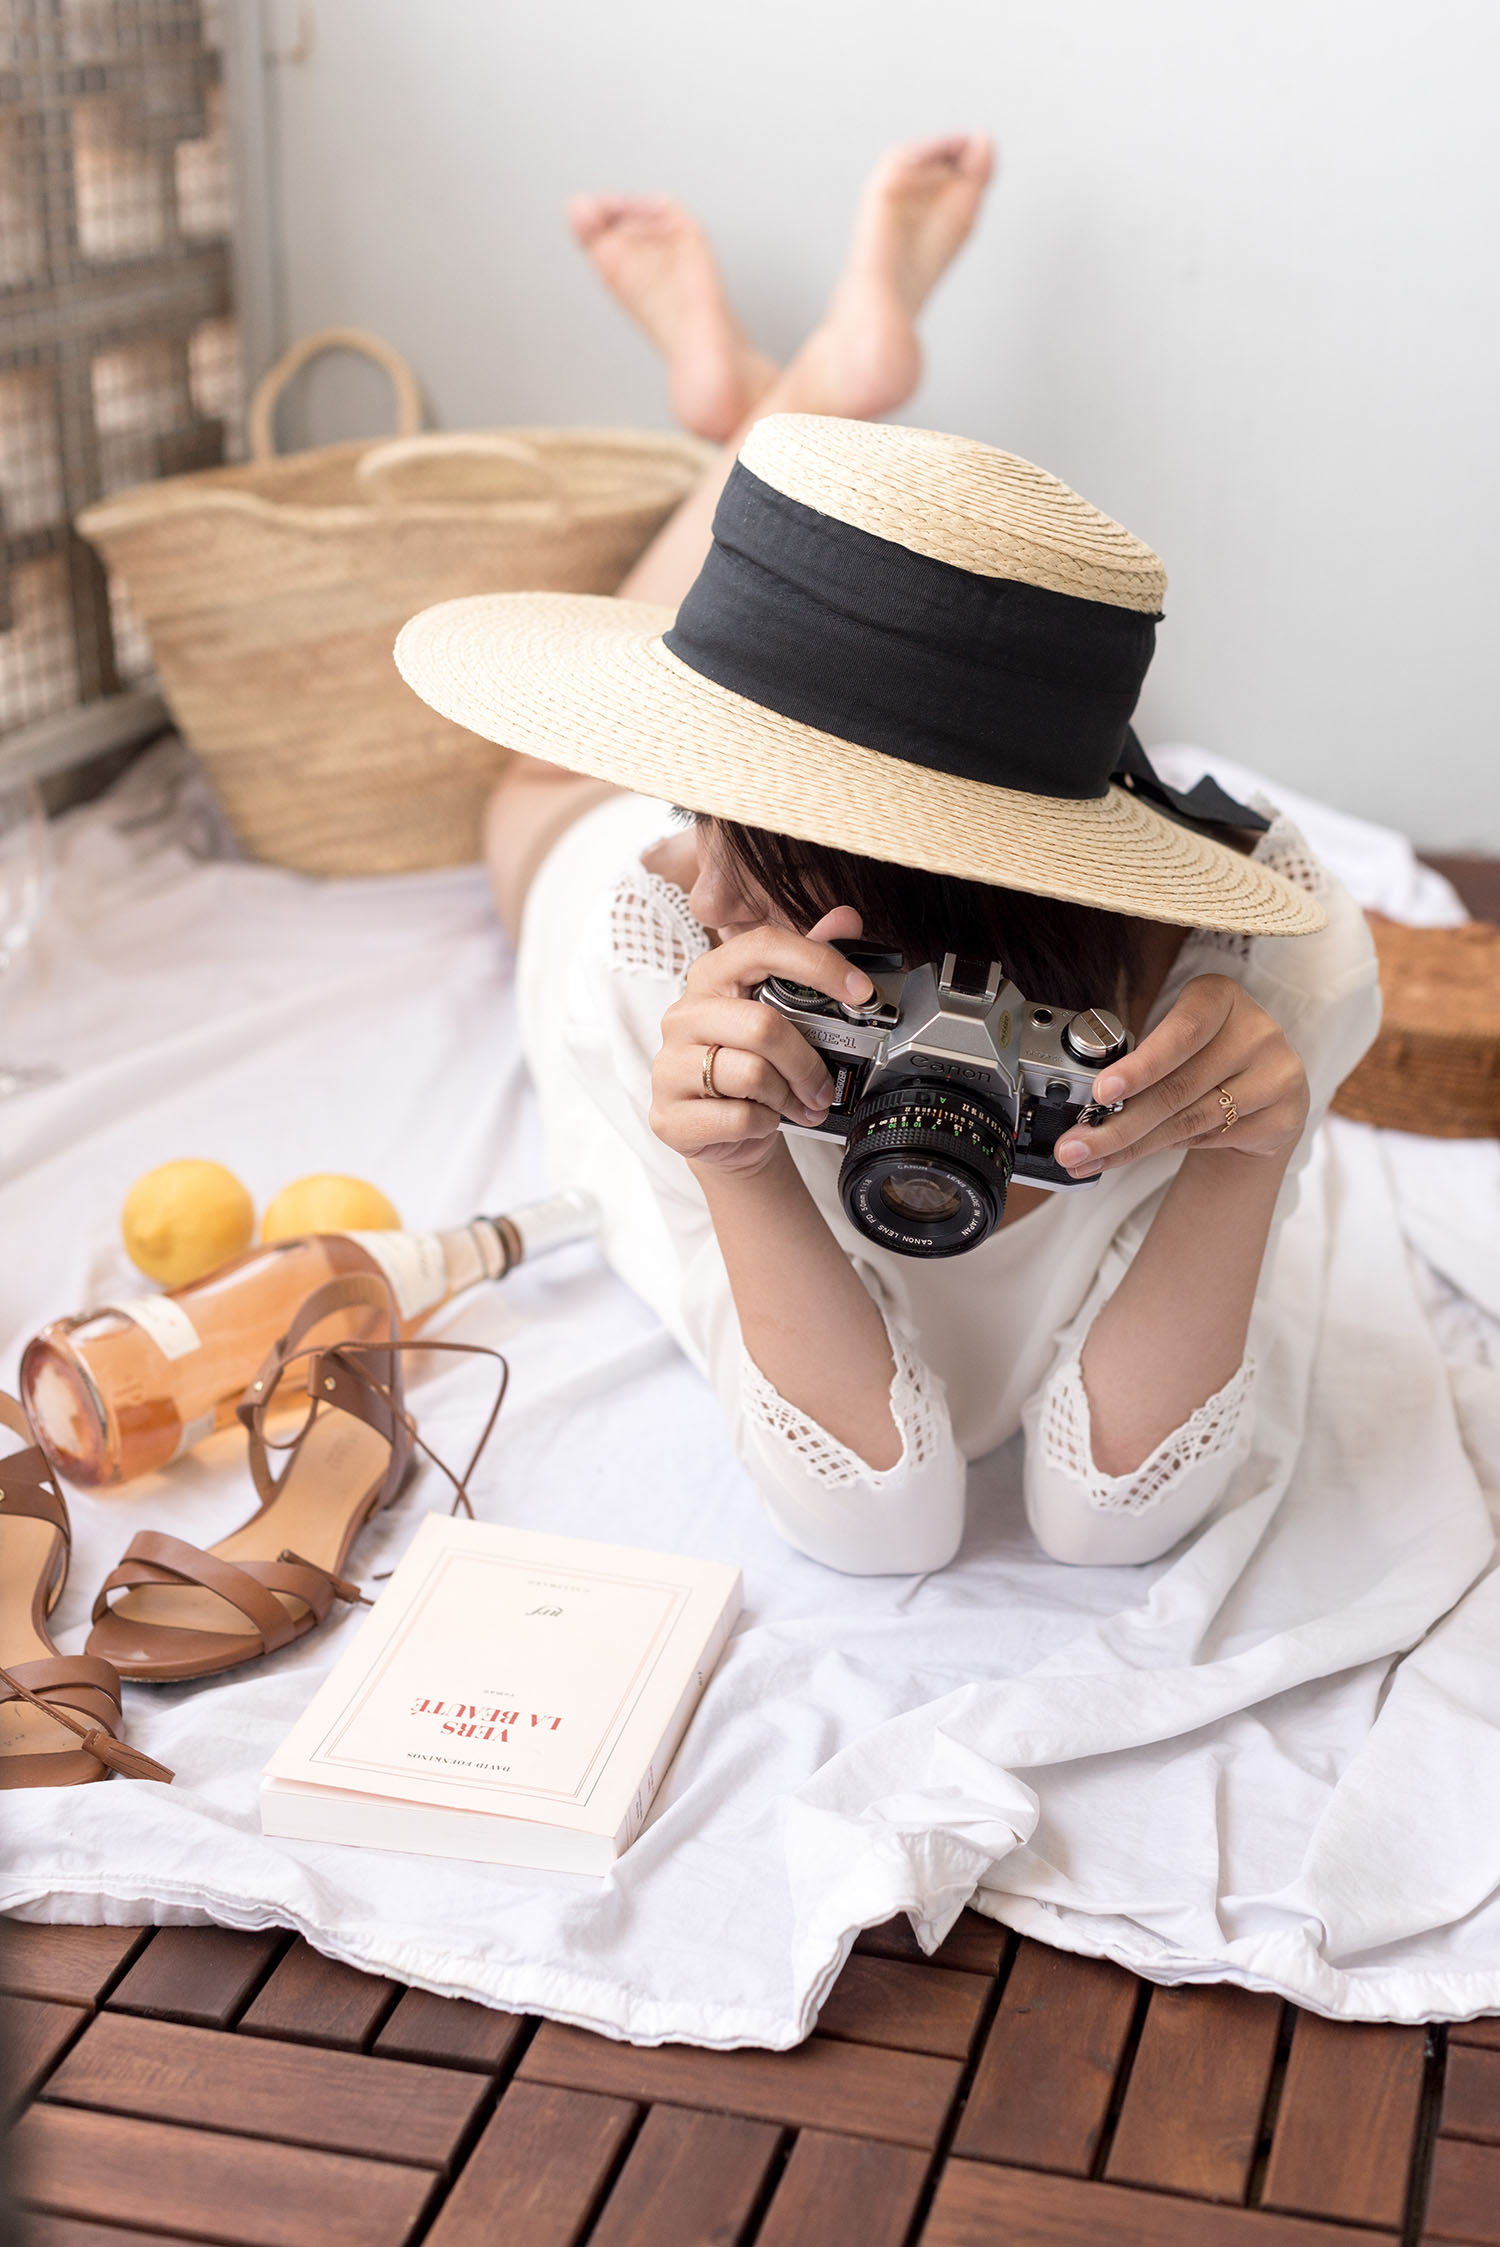 Top Canadian fashion blogger Cee Fardoe of Coco & Vera holds a Canon AE-1 camera while wearing a Mango straw hat